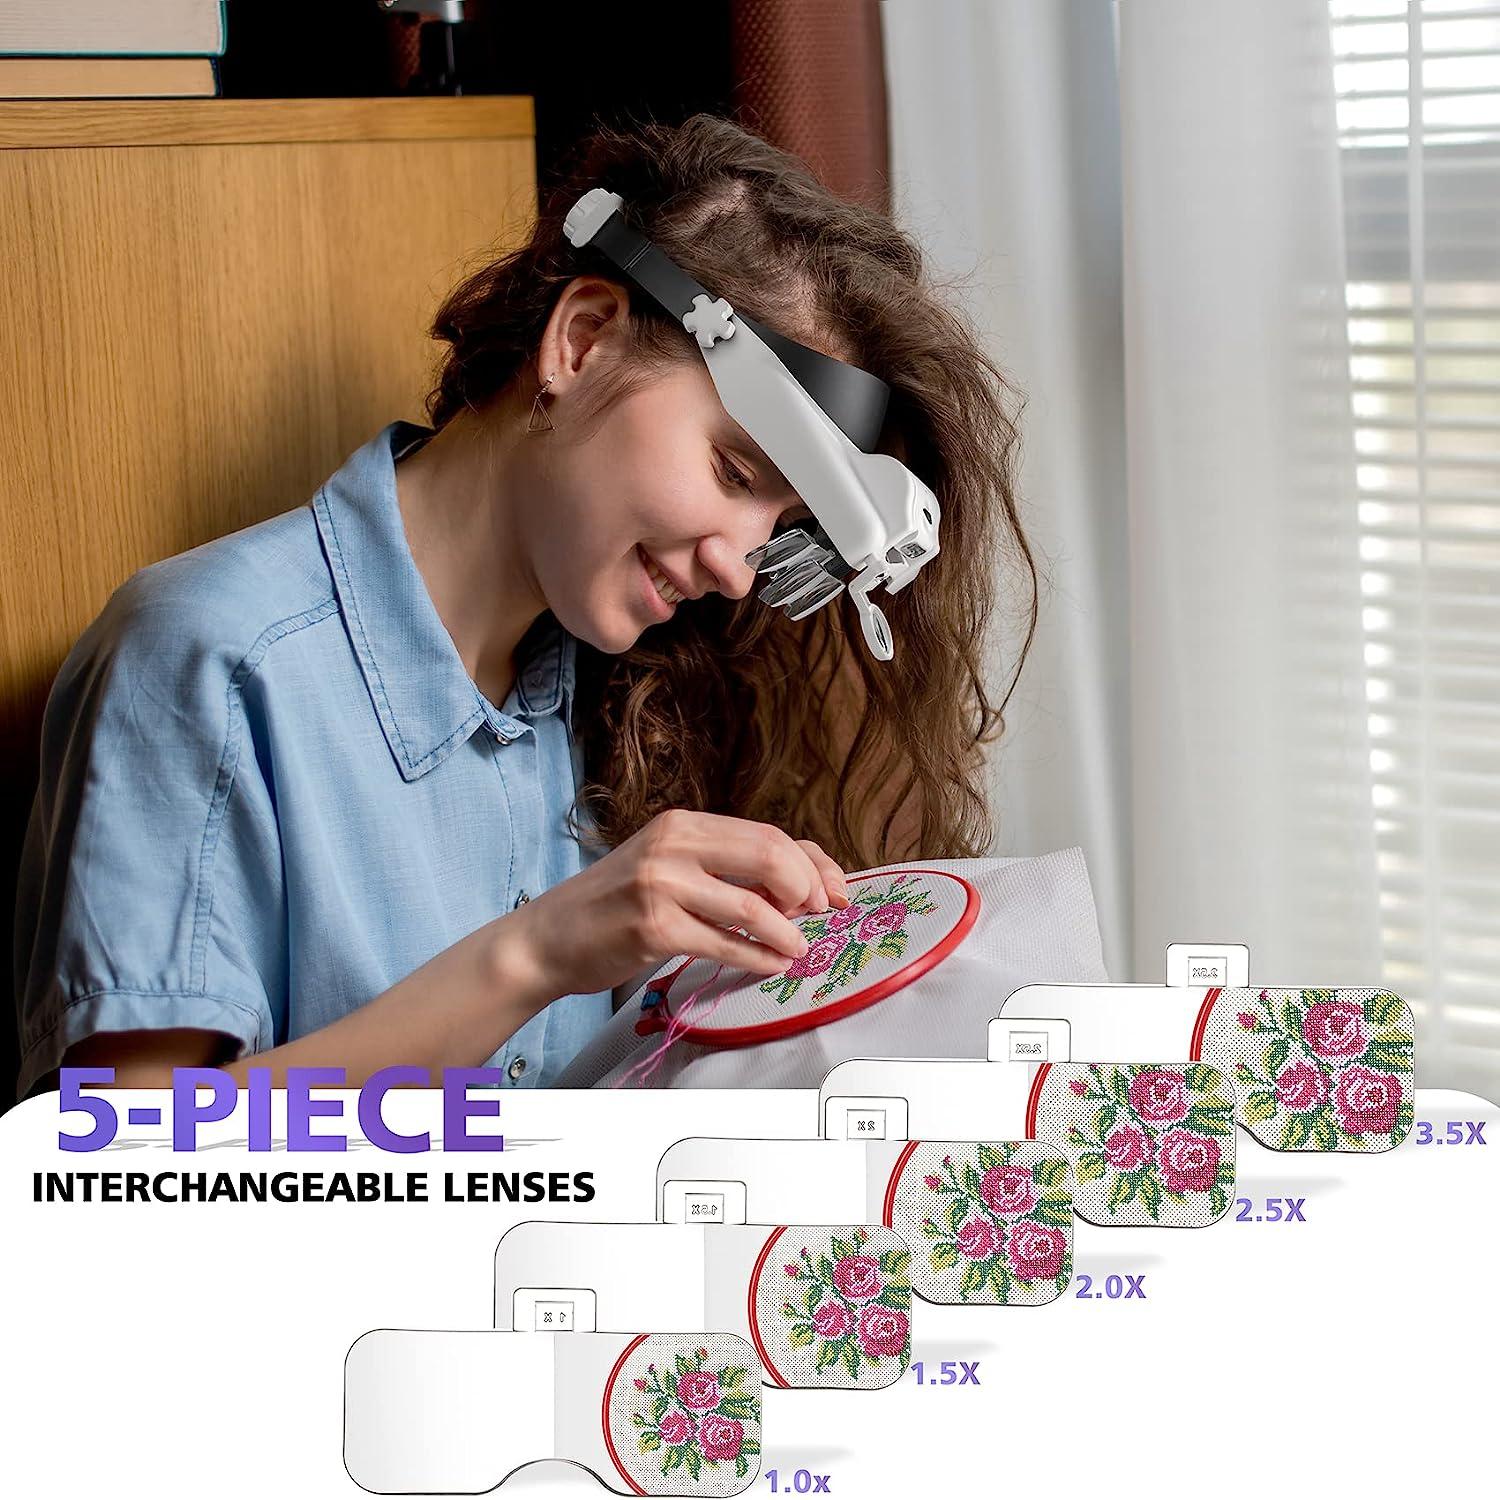 VISION AID Magnifying Glasses with A Storage Case (USB